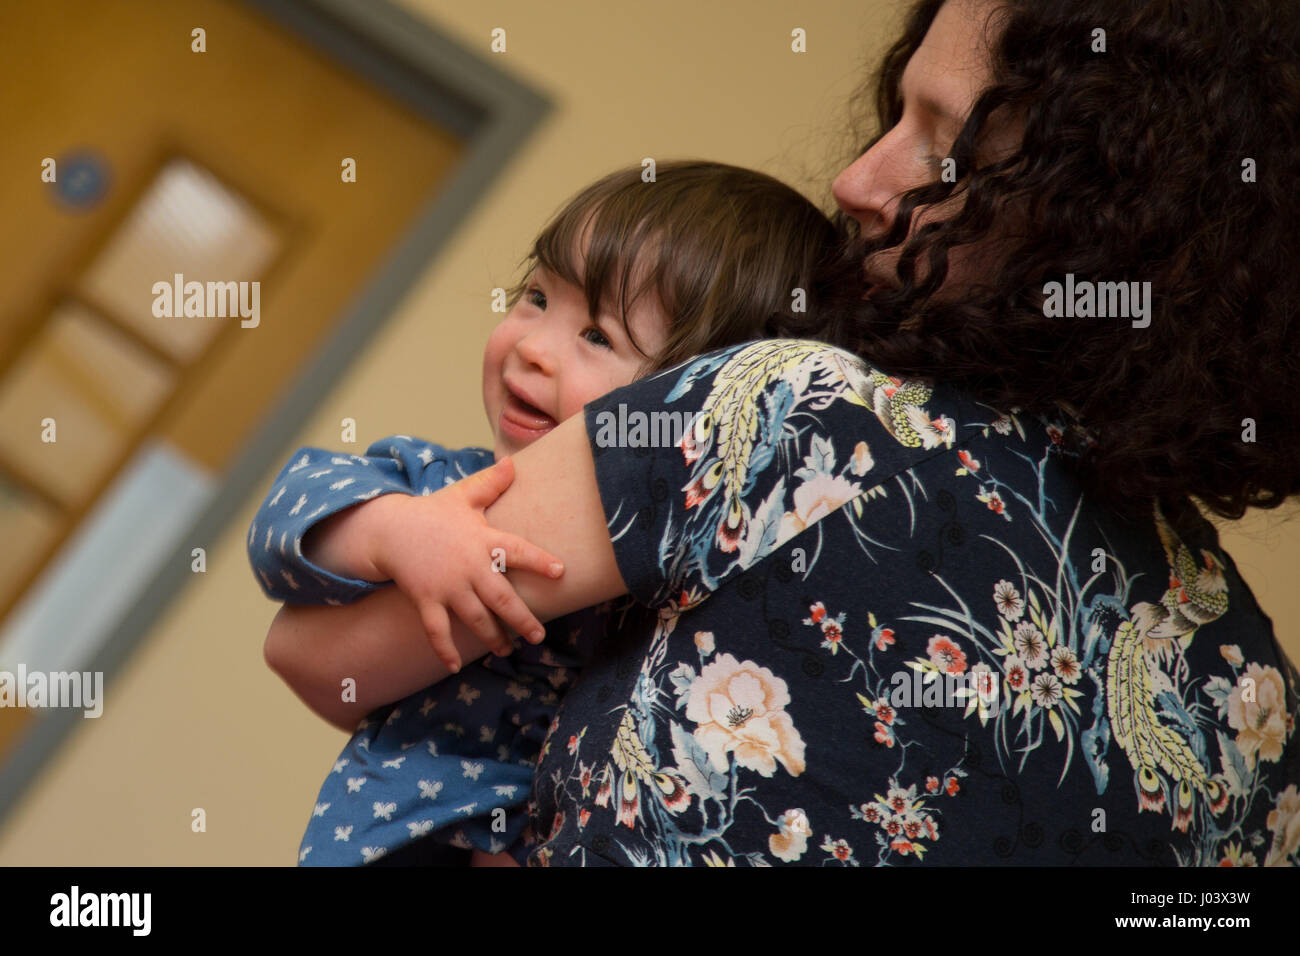 Toddler with downs syndrome Stock Photo